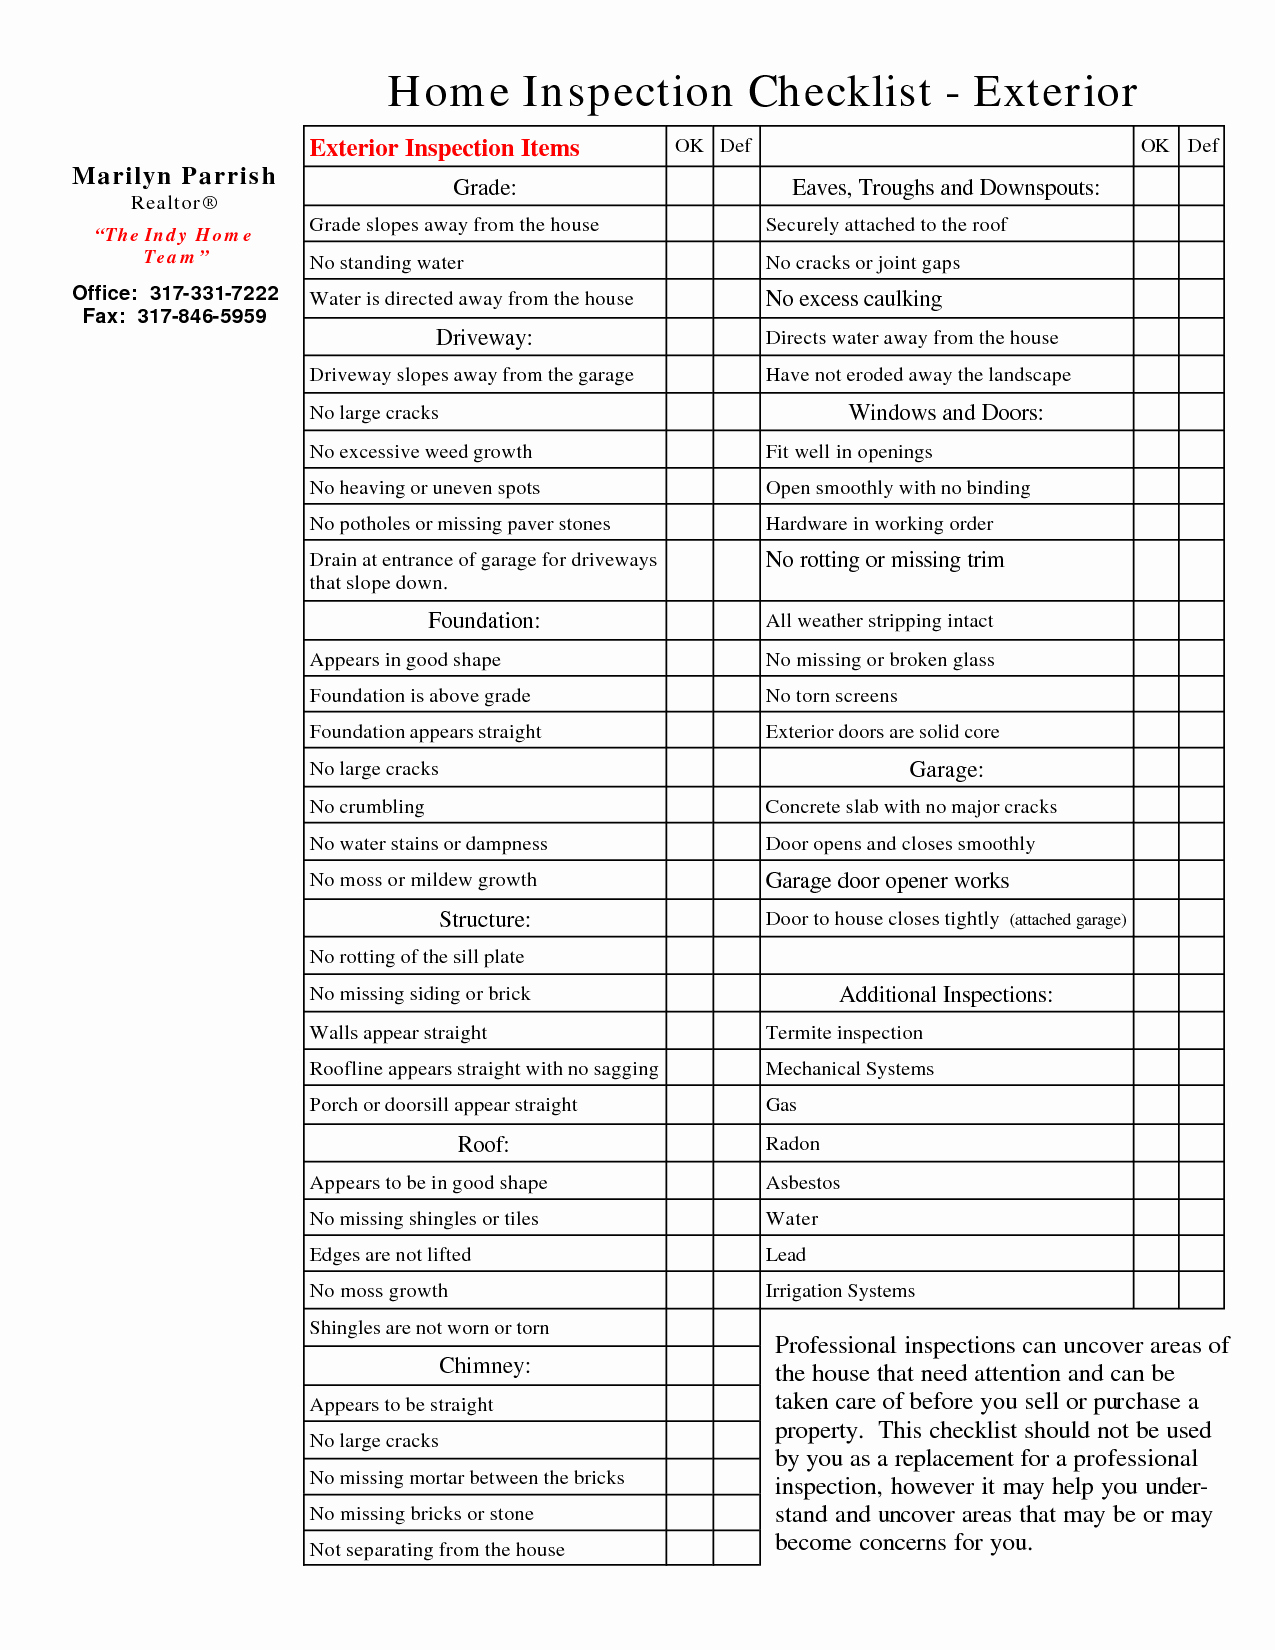 Home Inspection Checklist Templates Awesome Home Inspection List Template Document Sample